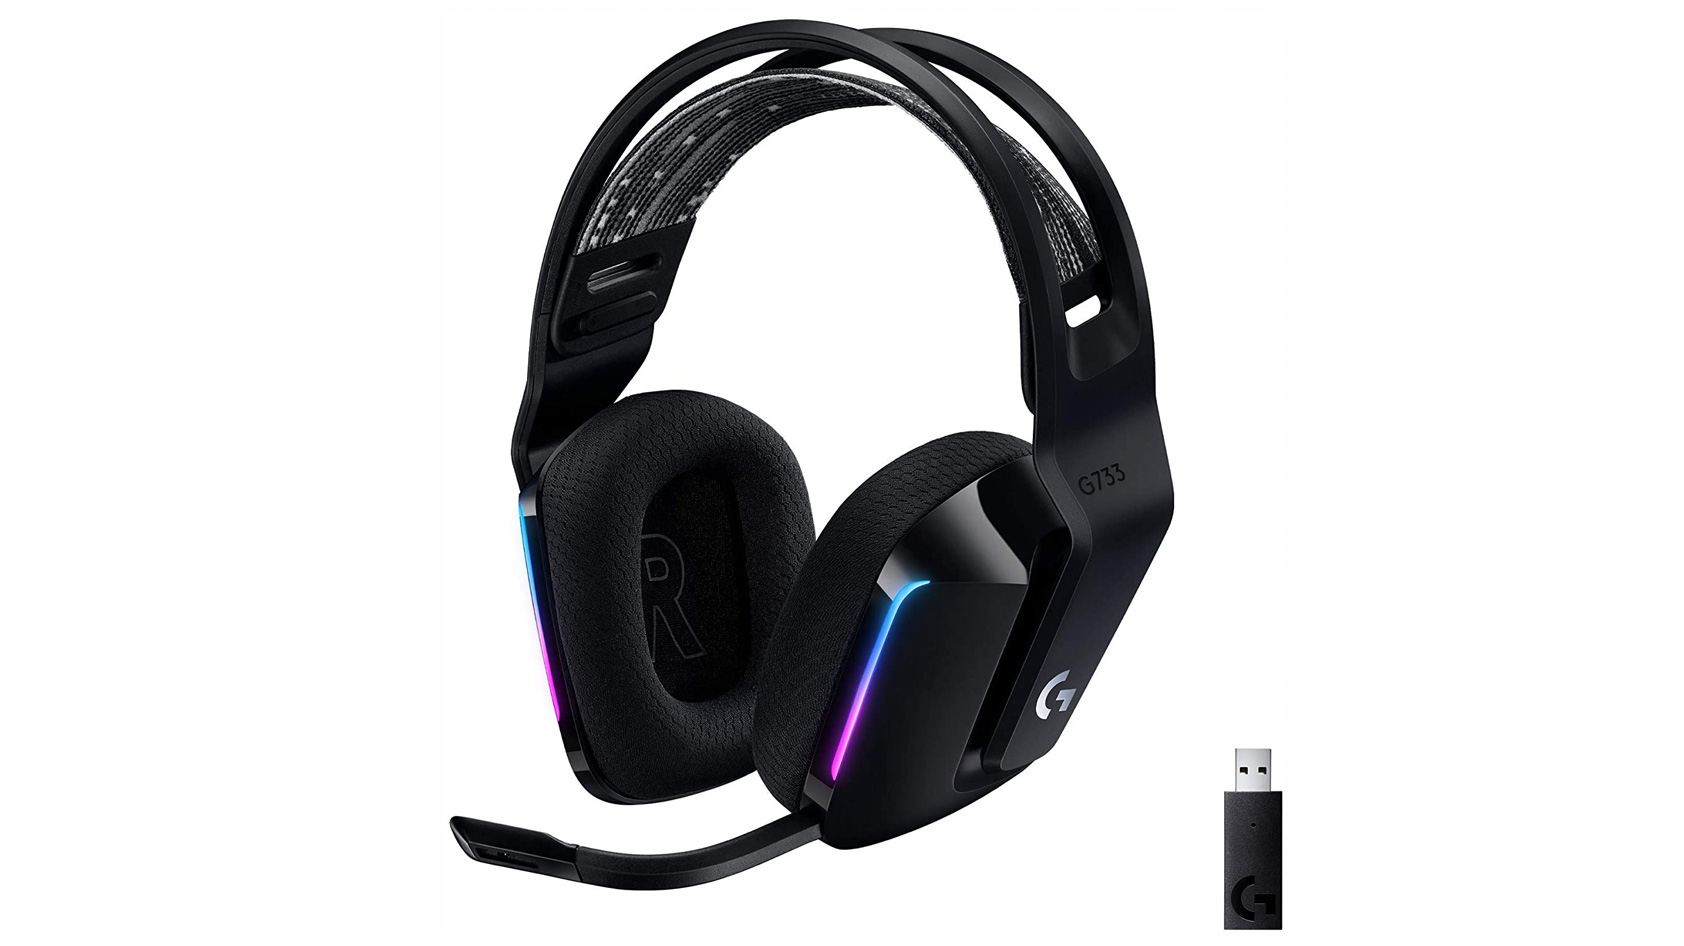 A product image of the Logitech G733 Lightspeed gaming headset in black against a white background.